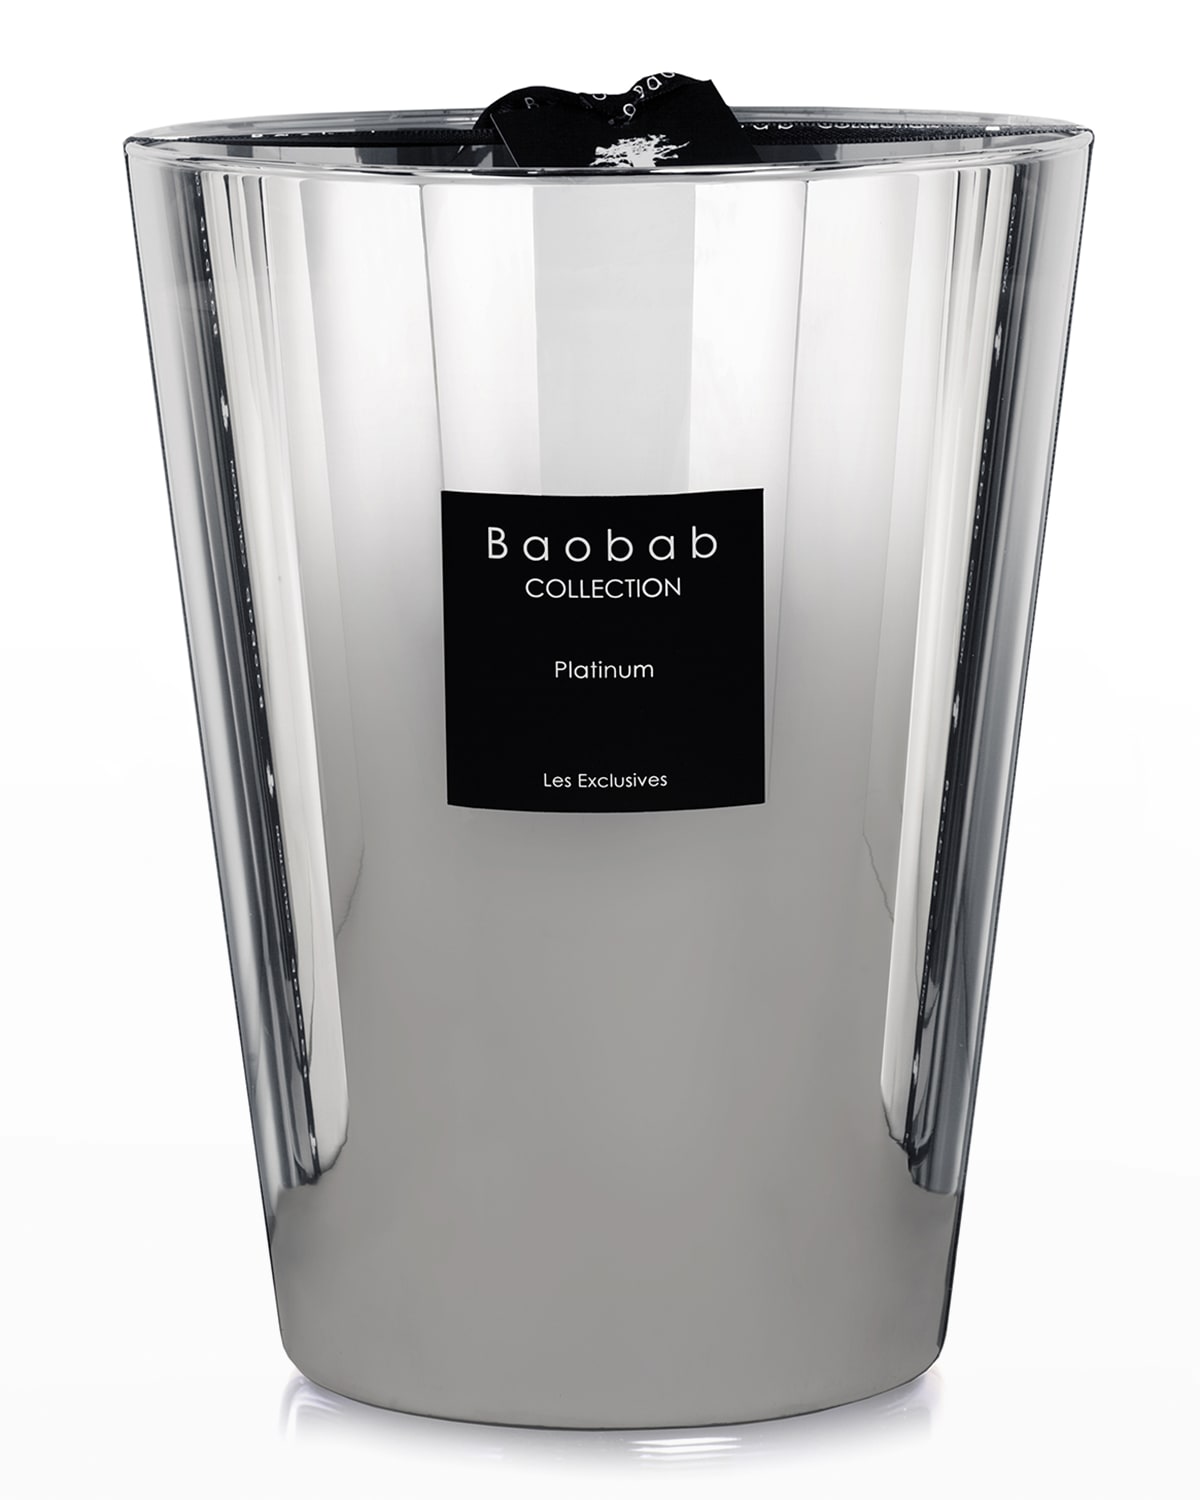 Baobab Collection Les Exclusives Platinum Scented Candle, 9.4" In Silver